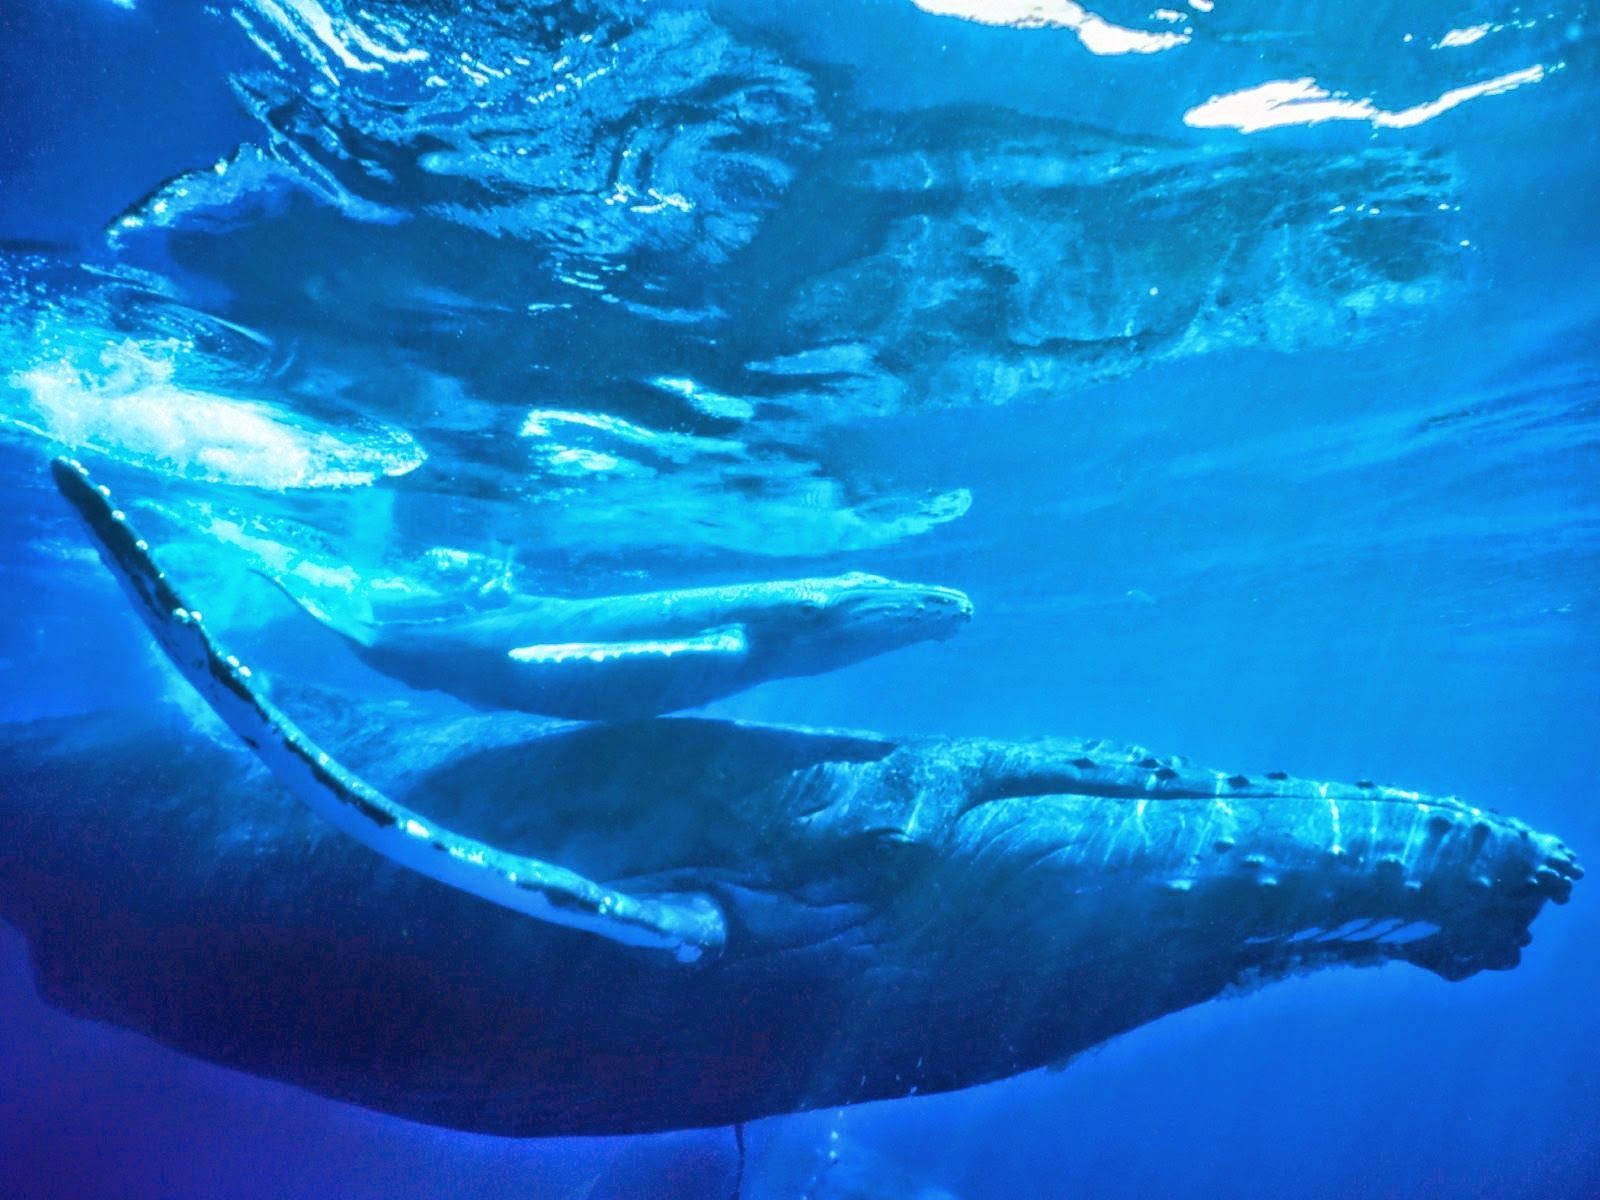 Blue Whale - HD Wallpapers | Earth Blog